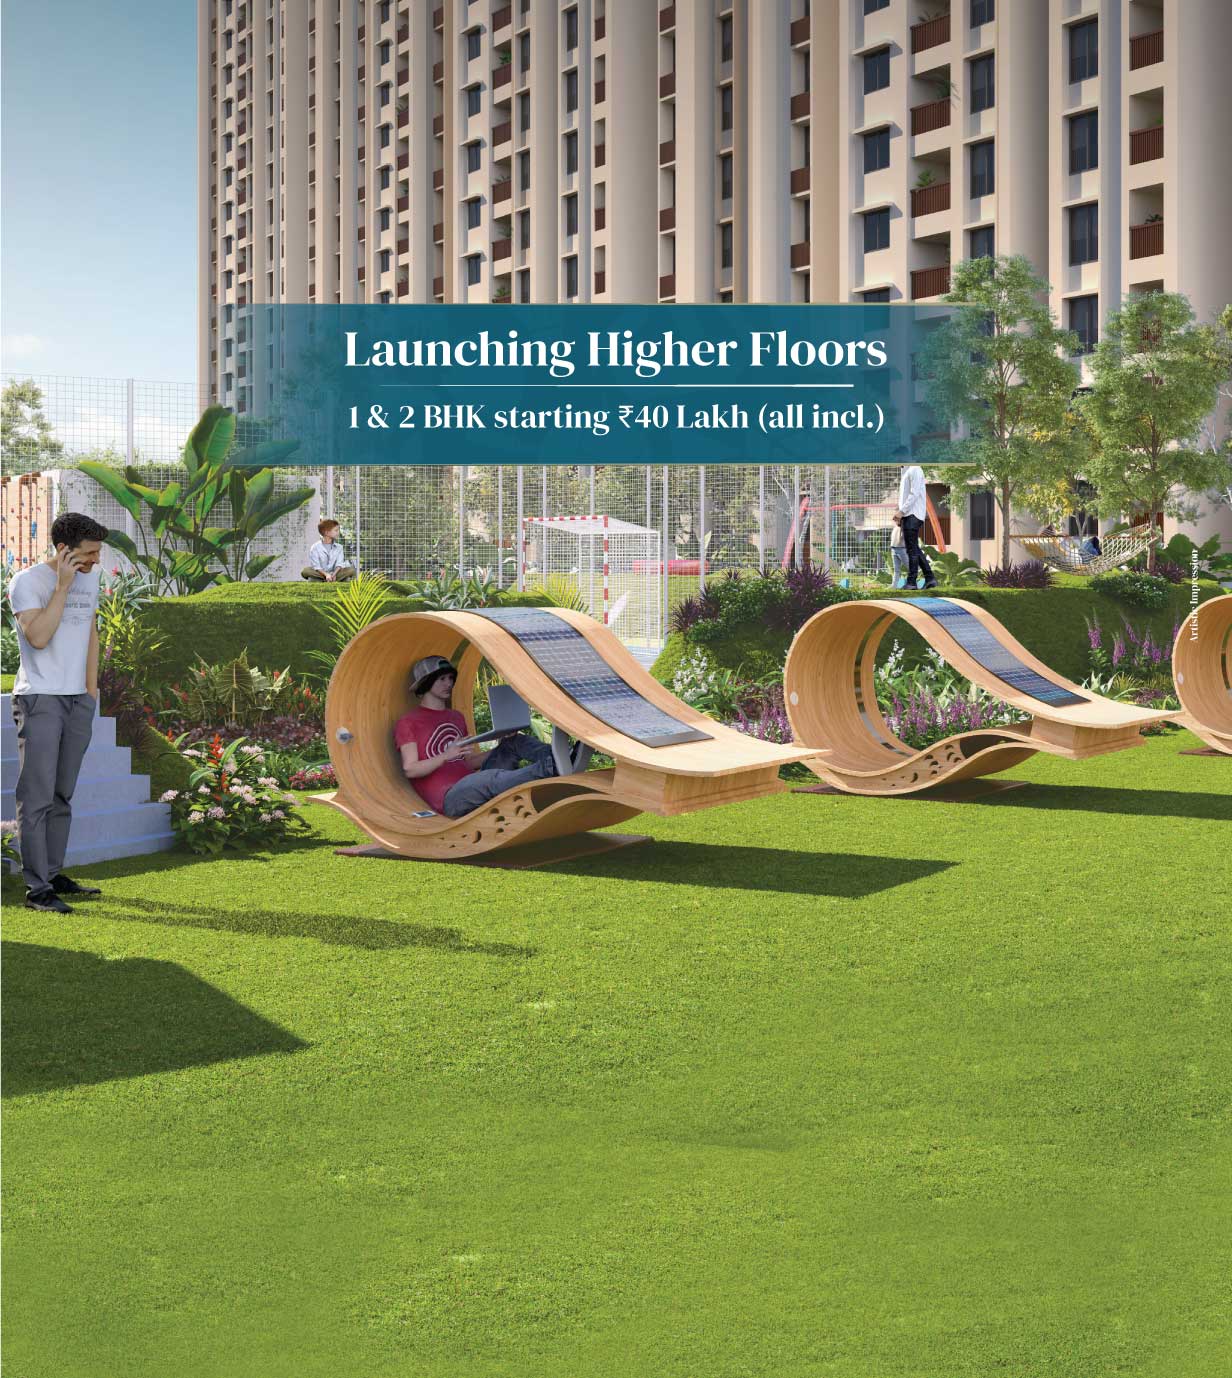 Launching higher floors at Mahindra Happinest Tathawade in Pune Update